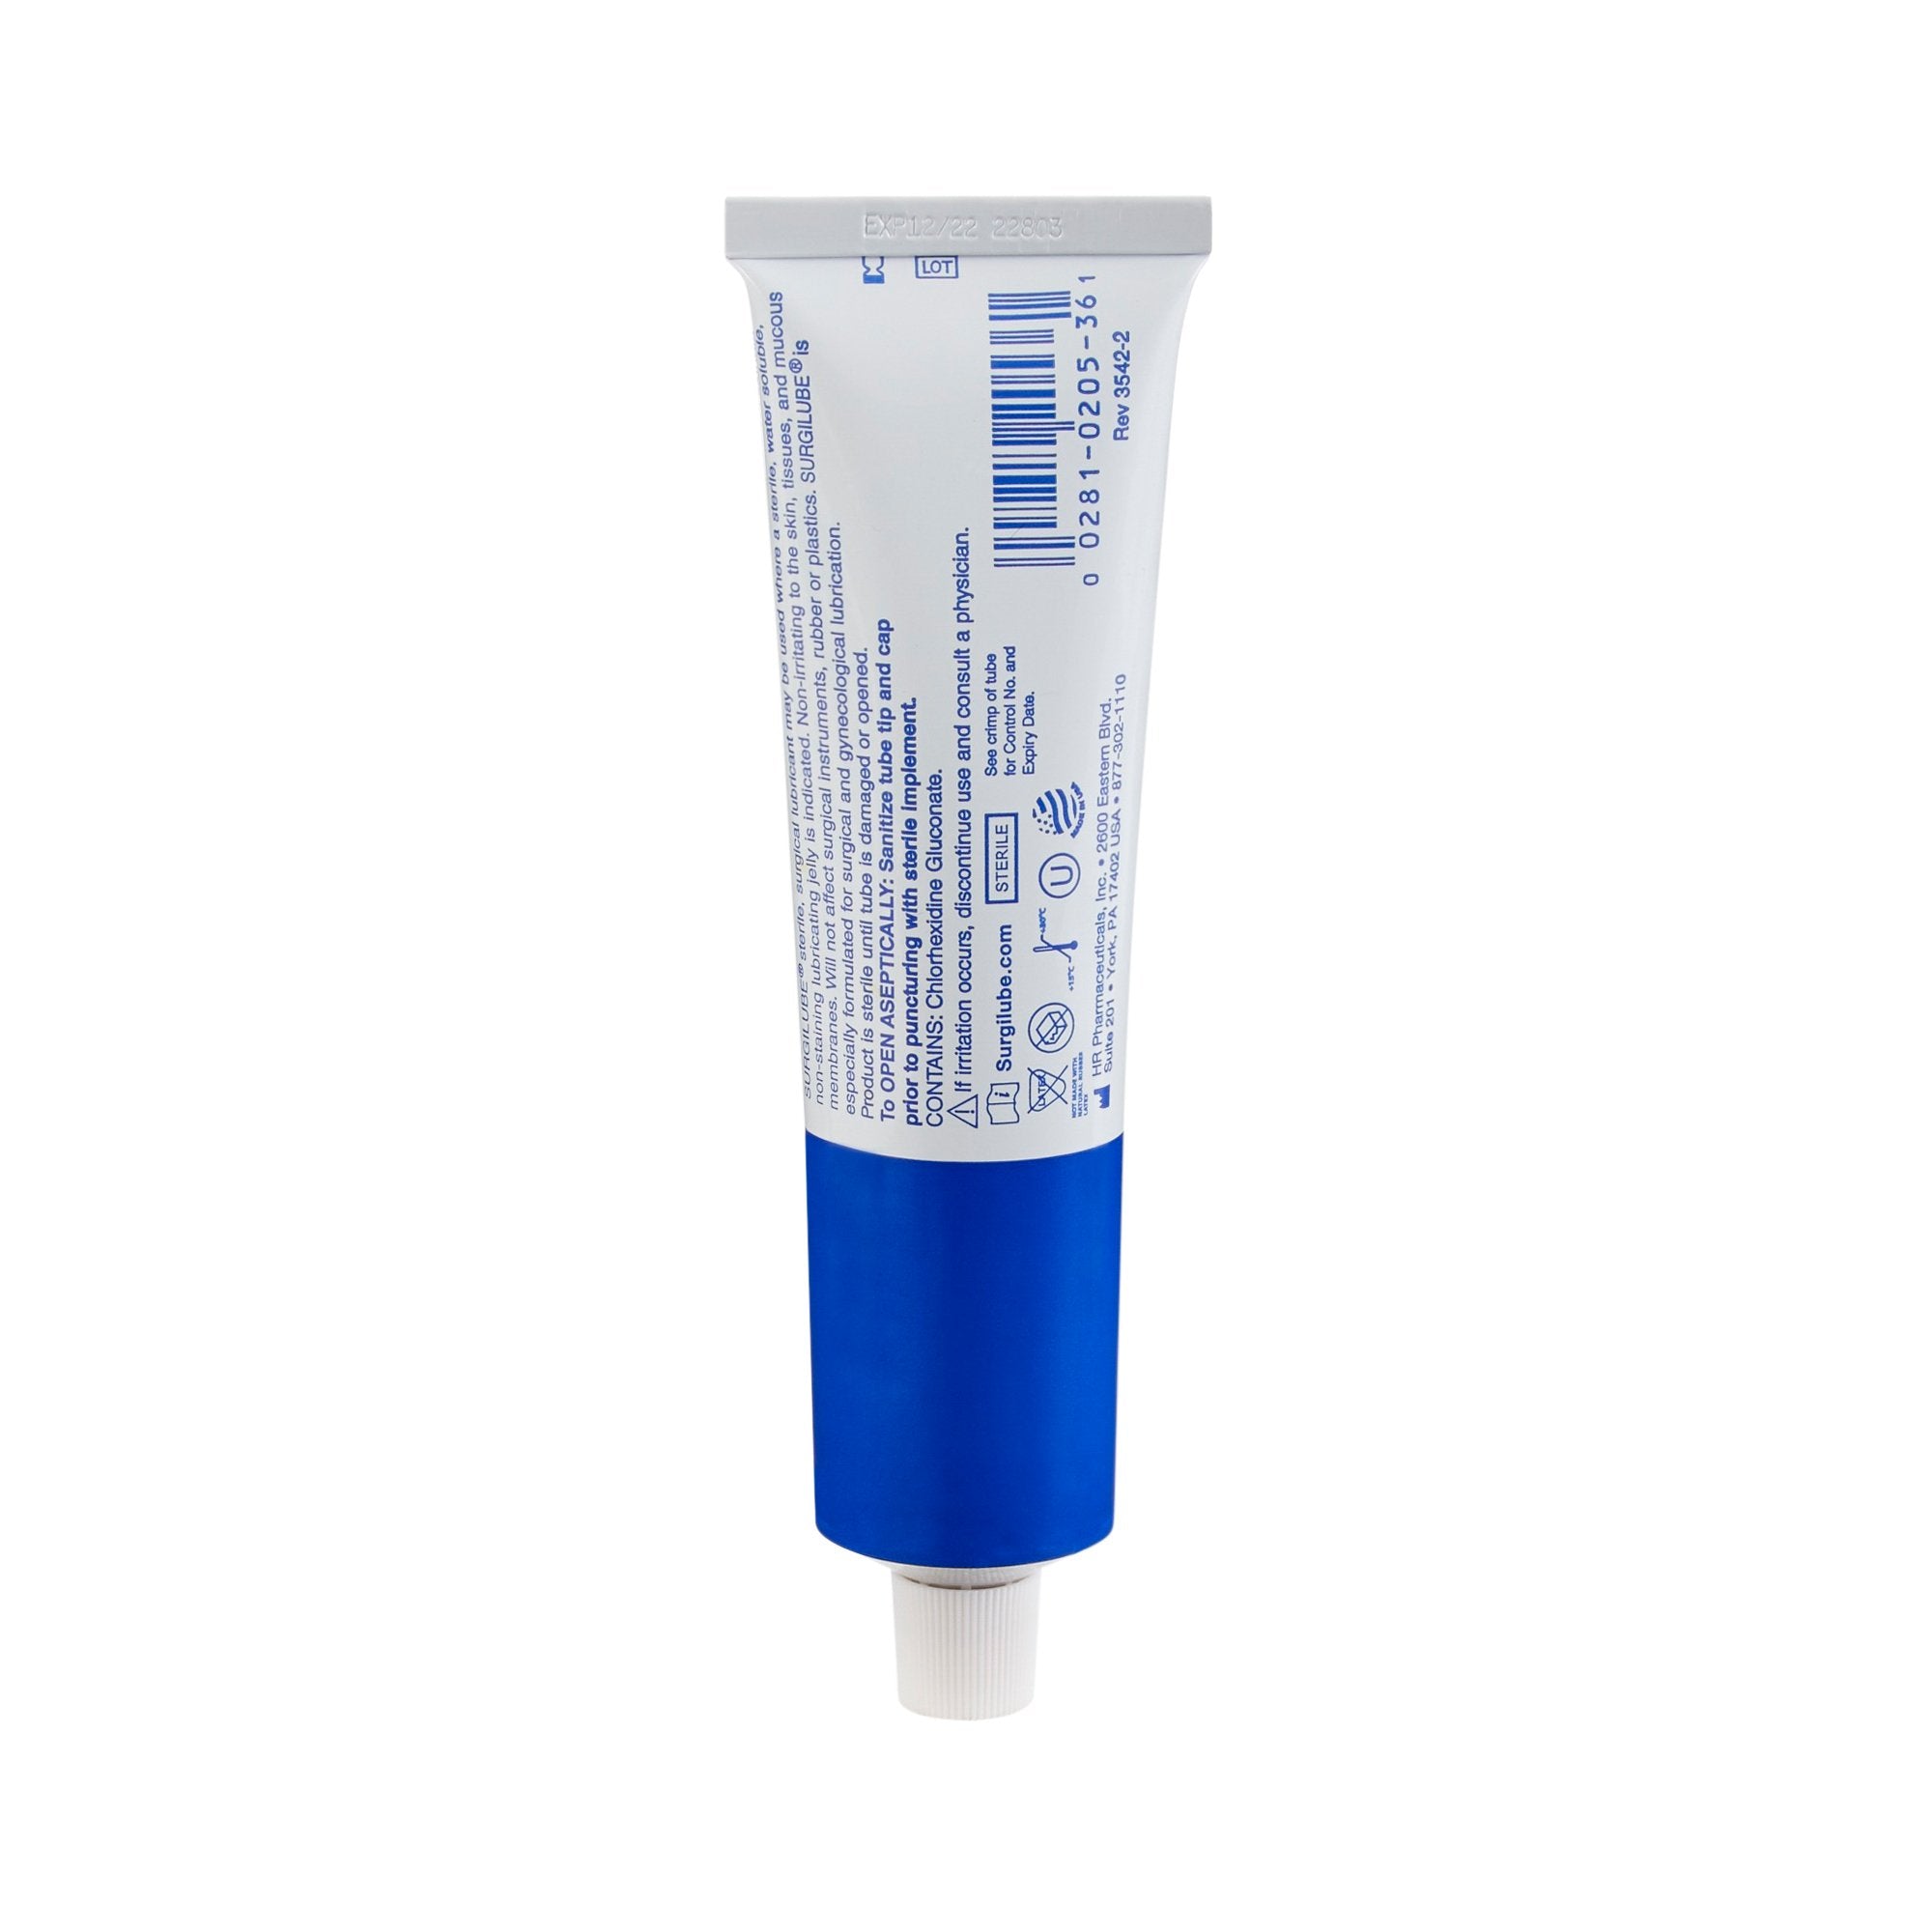 Lubricating Jelly - Carbomer free Surgilube® 4.25 oz. Tube Sterile